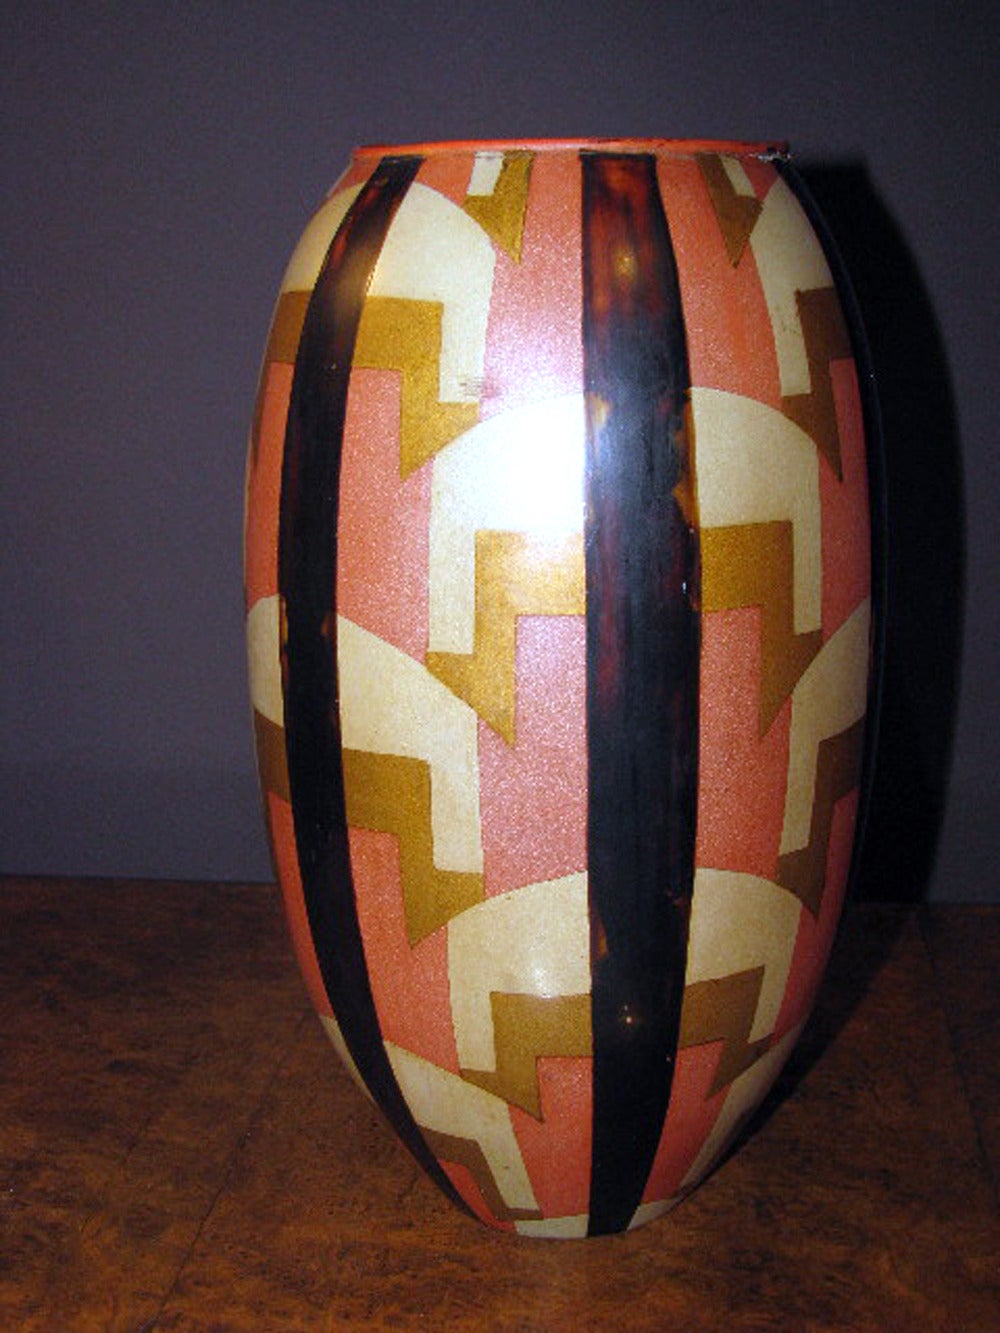 Metal egg-shaped vase on a pink lacquered ground with geometric patterns of stylized bridges and tortoise shell lacquer strips.
A few lacquer chips around the neck.